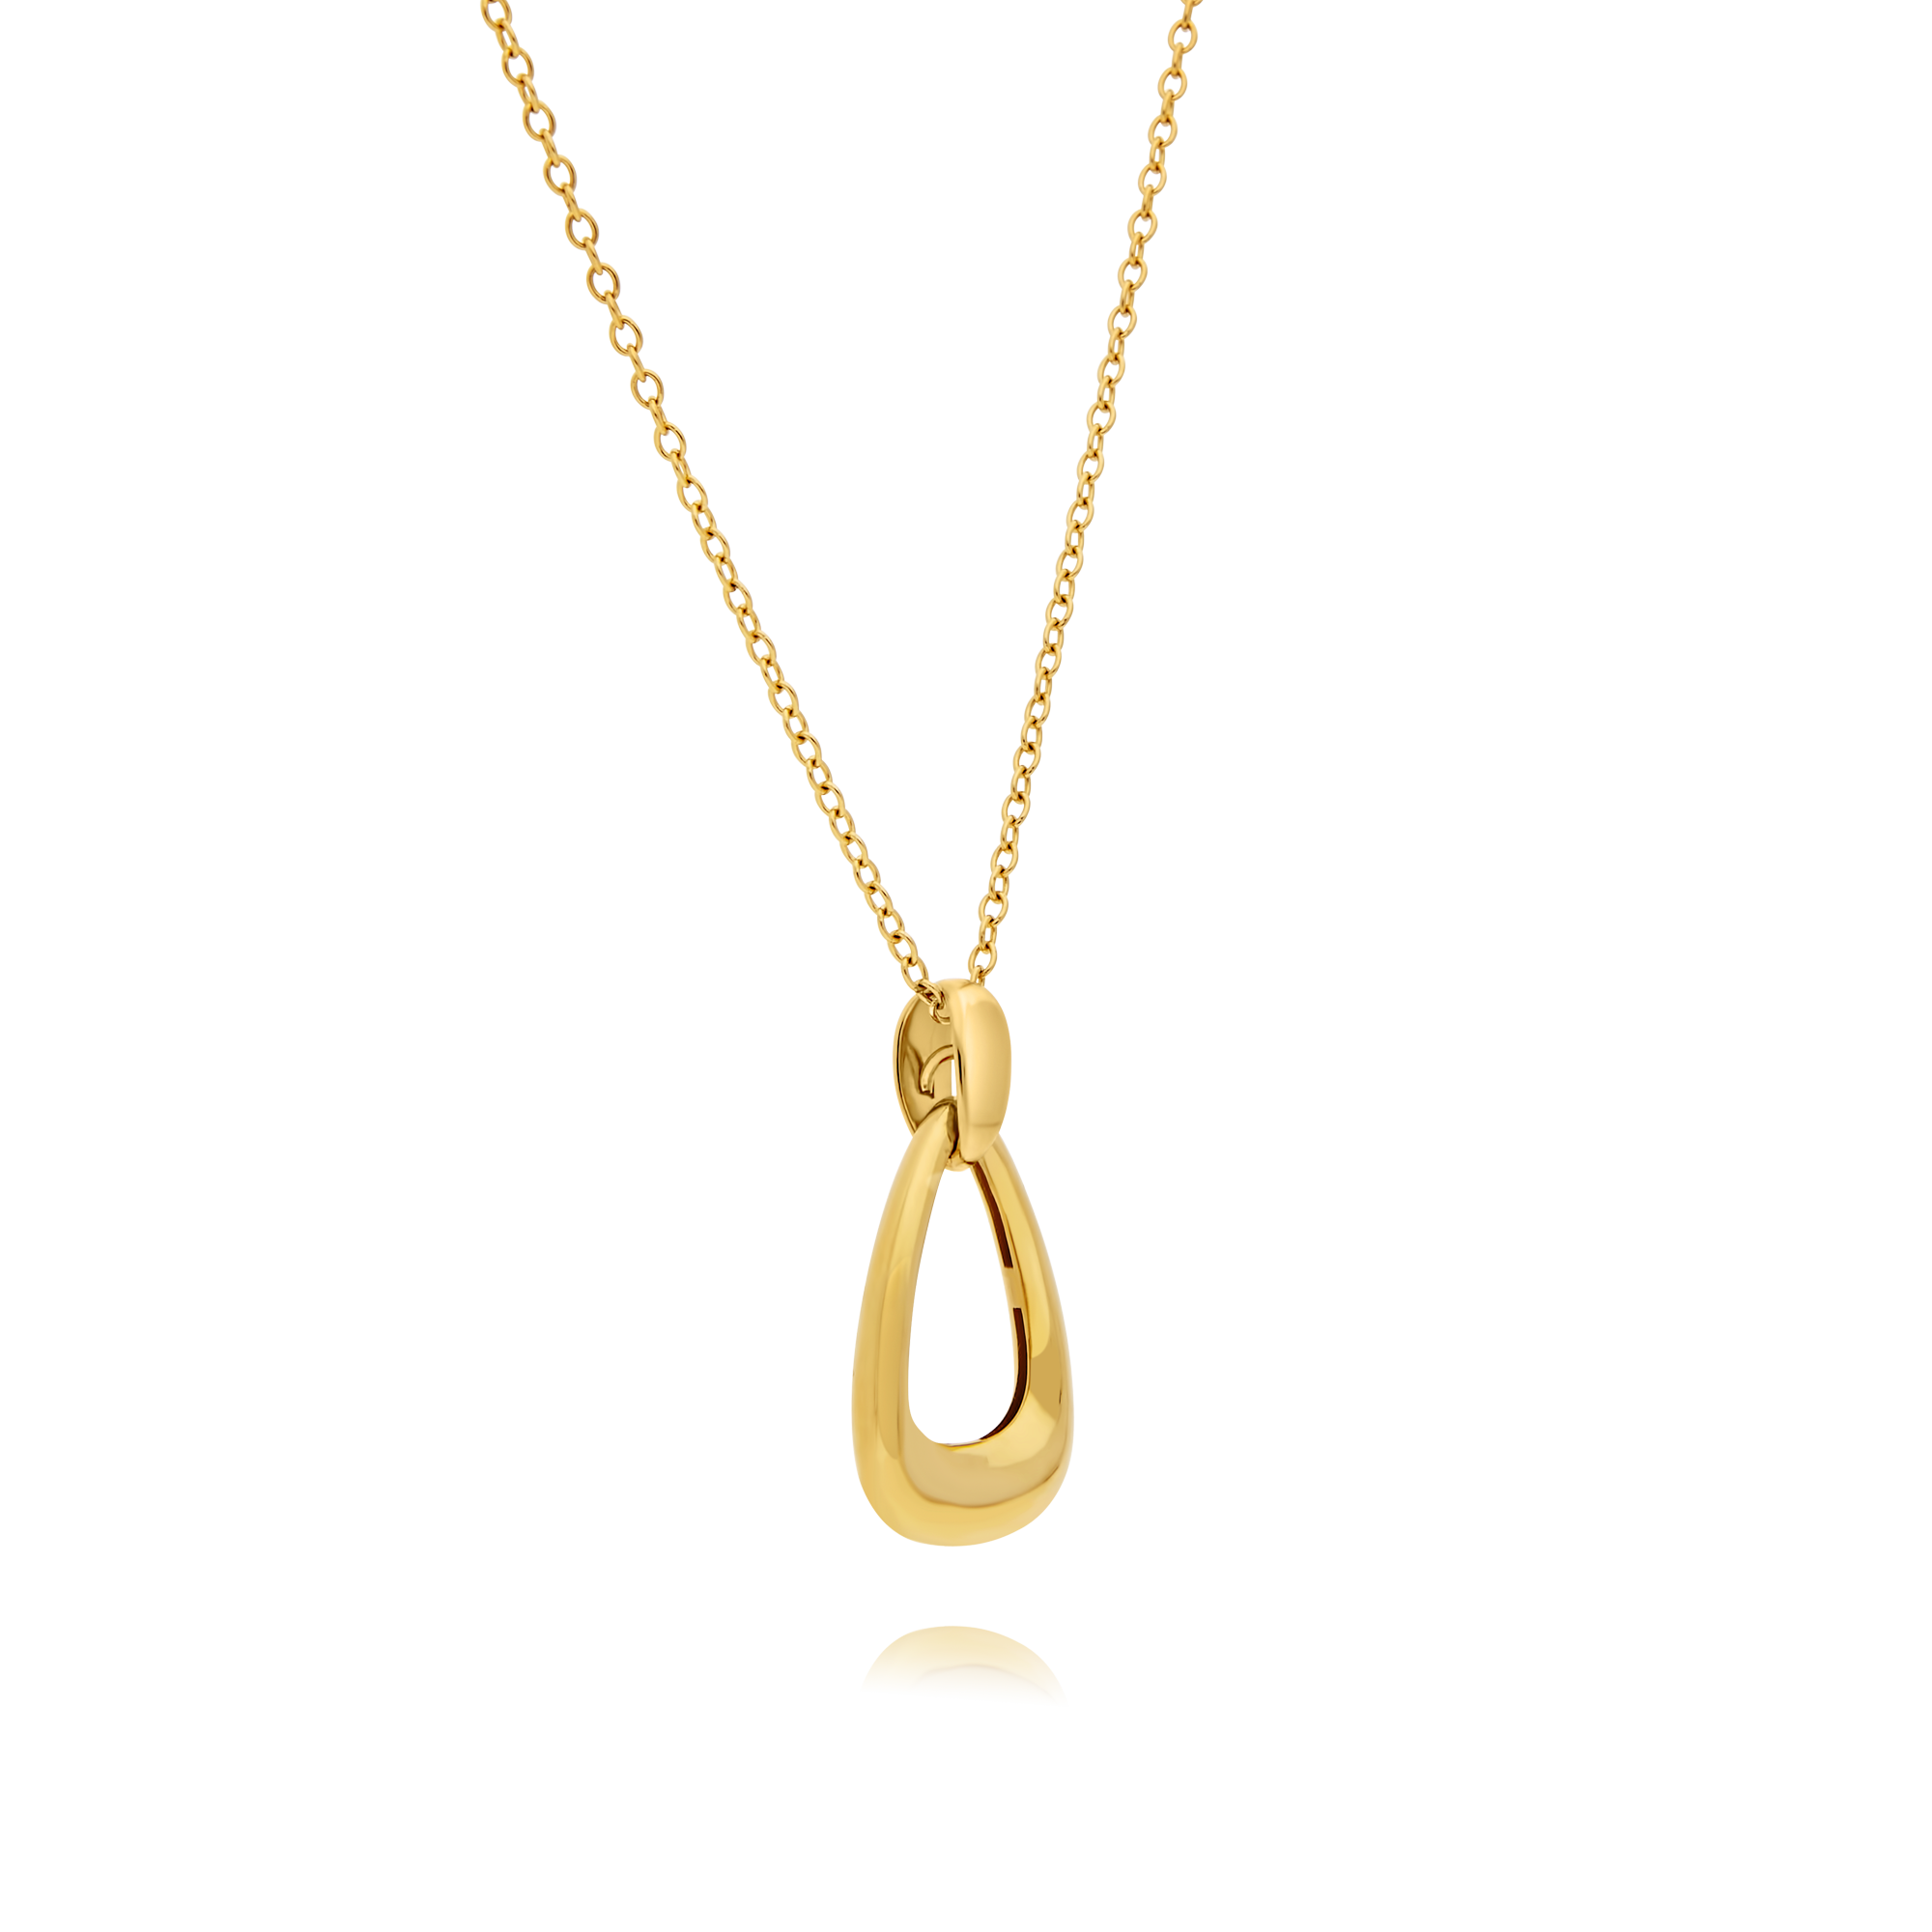 Rainbow Pendant Necklace 18ct Gold Plated Vermeil - Trendolla Jewelry